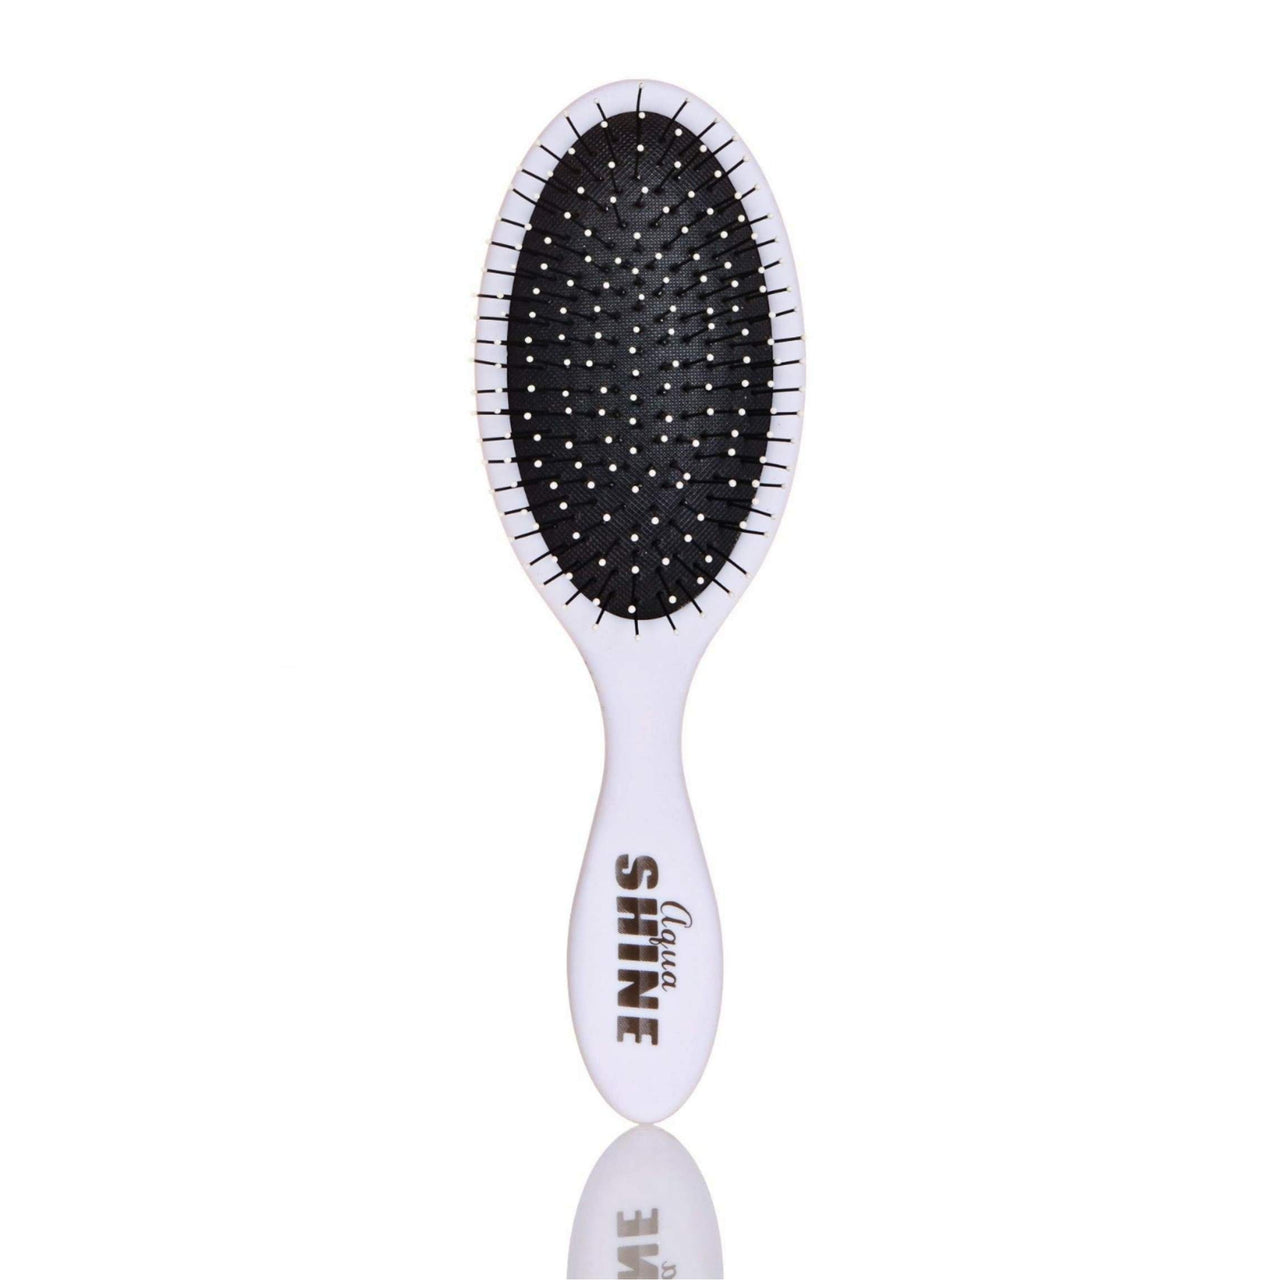 Wet Dry Brush Soft Flexible Bristles Detangles and Smooths with Ease - White